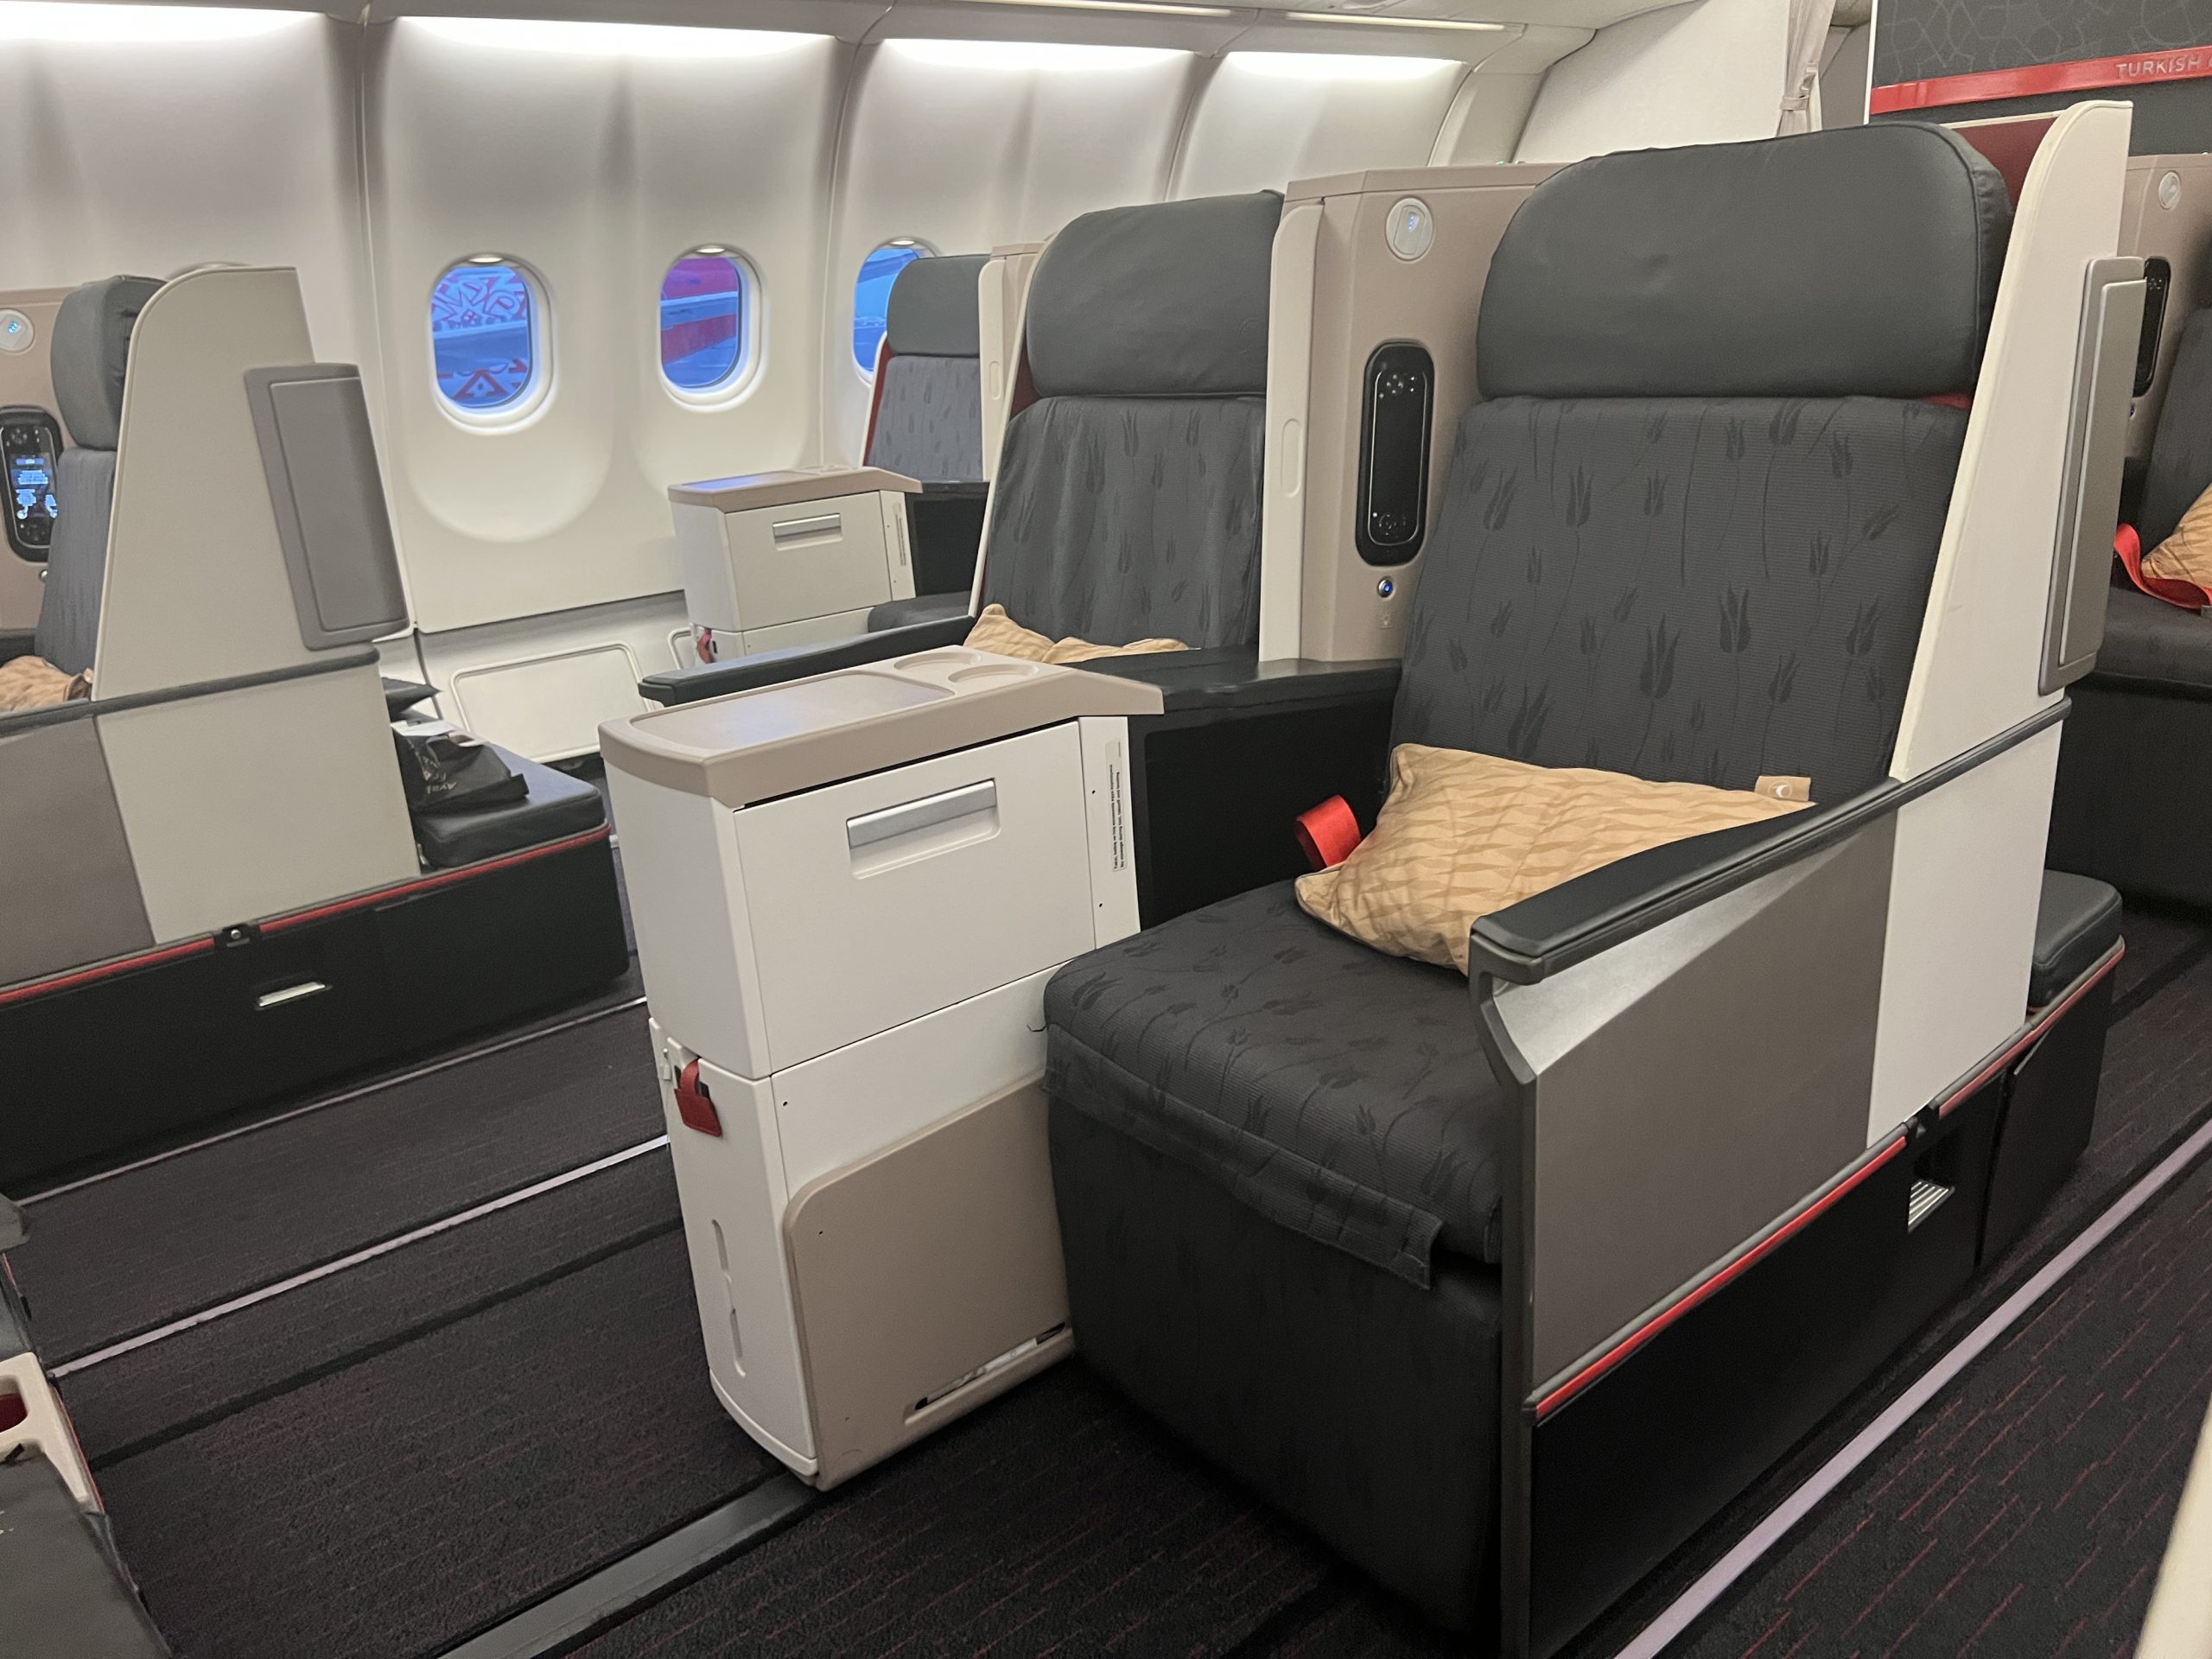 Turkish Airlines Airbus A330 300 Seat Map - Image to u